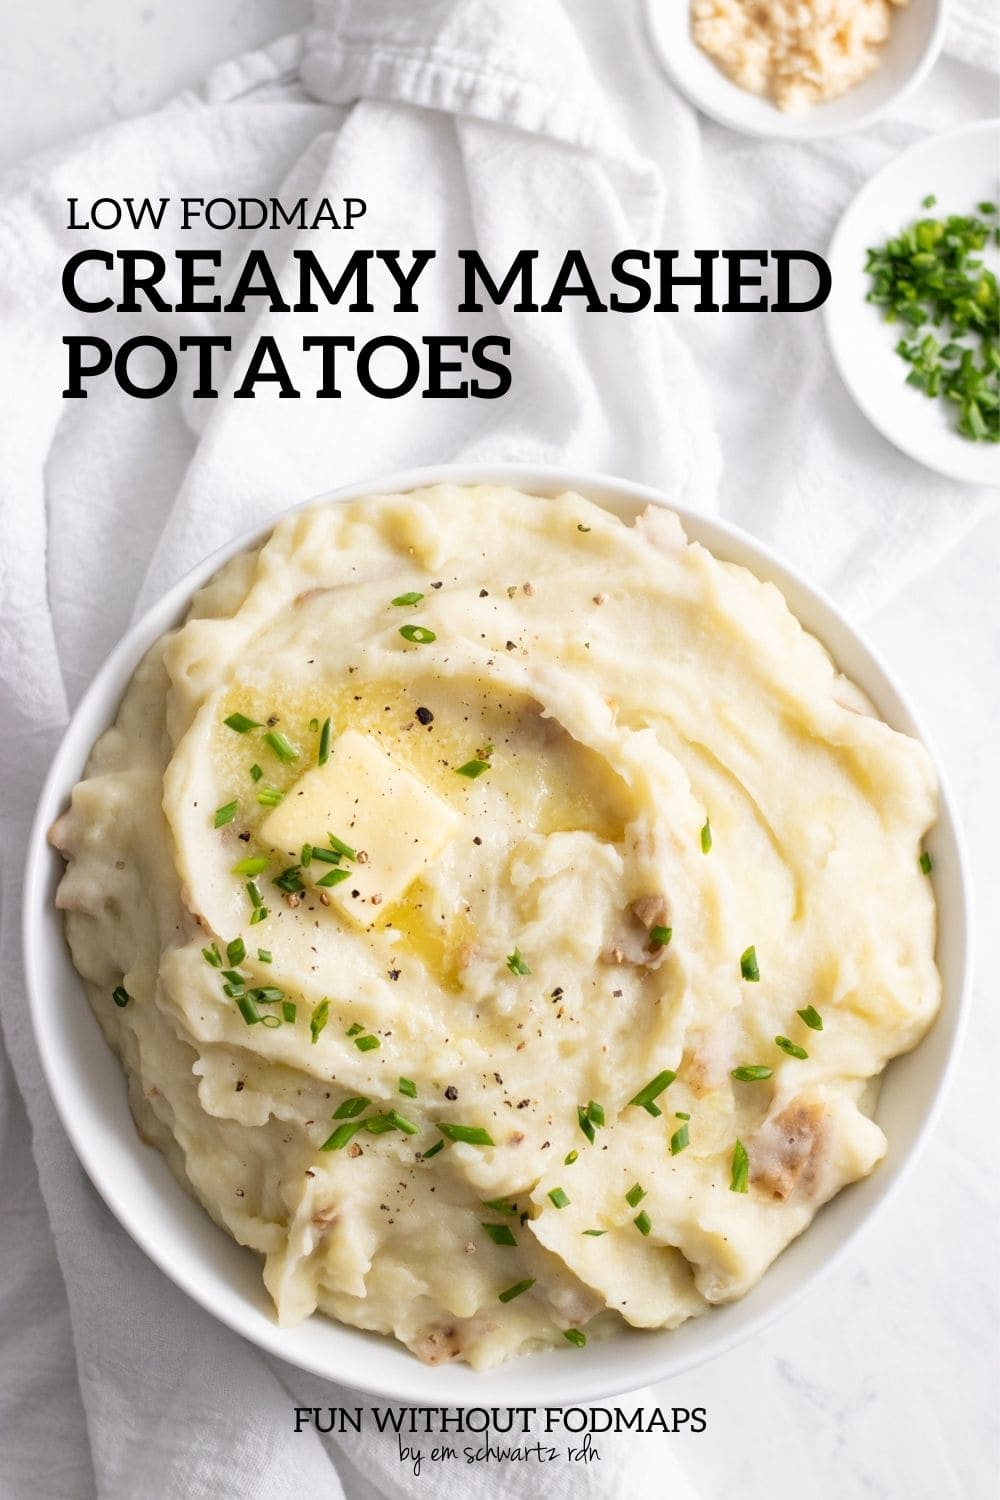 Looking down at a bowl of mashed potatoes topped with snipped fresh chives, a dab of melting butter, and freshly-cracked black pepper. In the white space above the bowl, black text reads "Low FODMAP Creamy Mashed Potatoes."